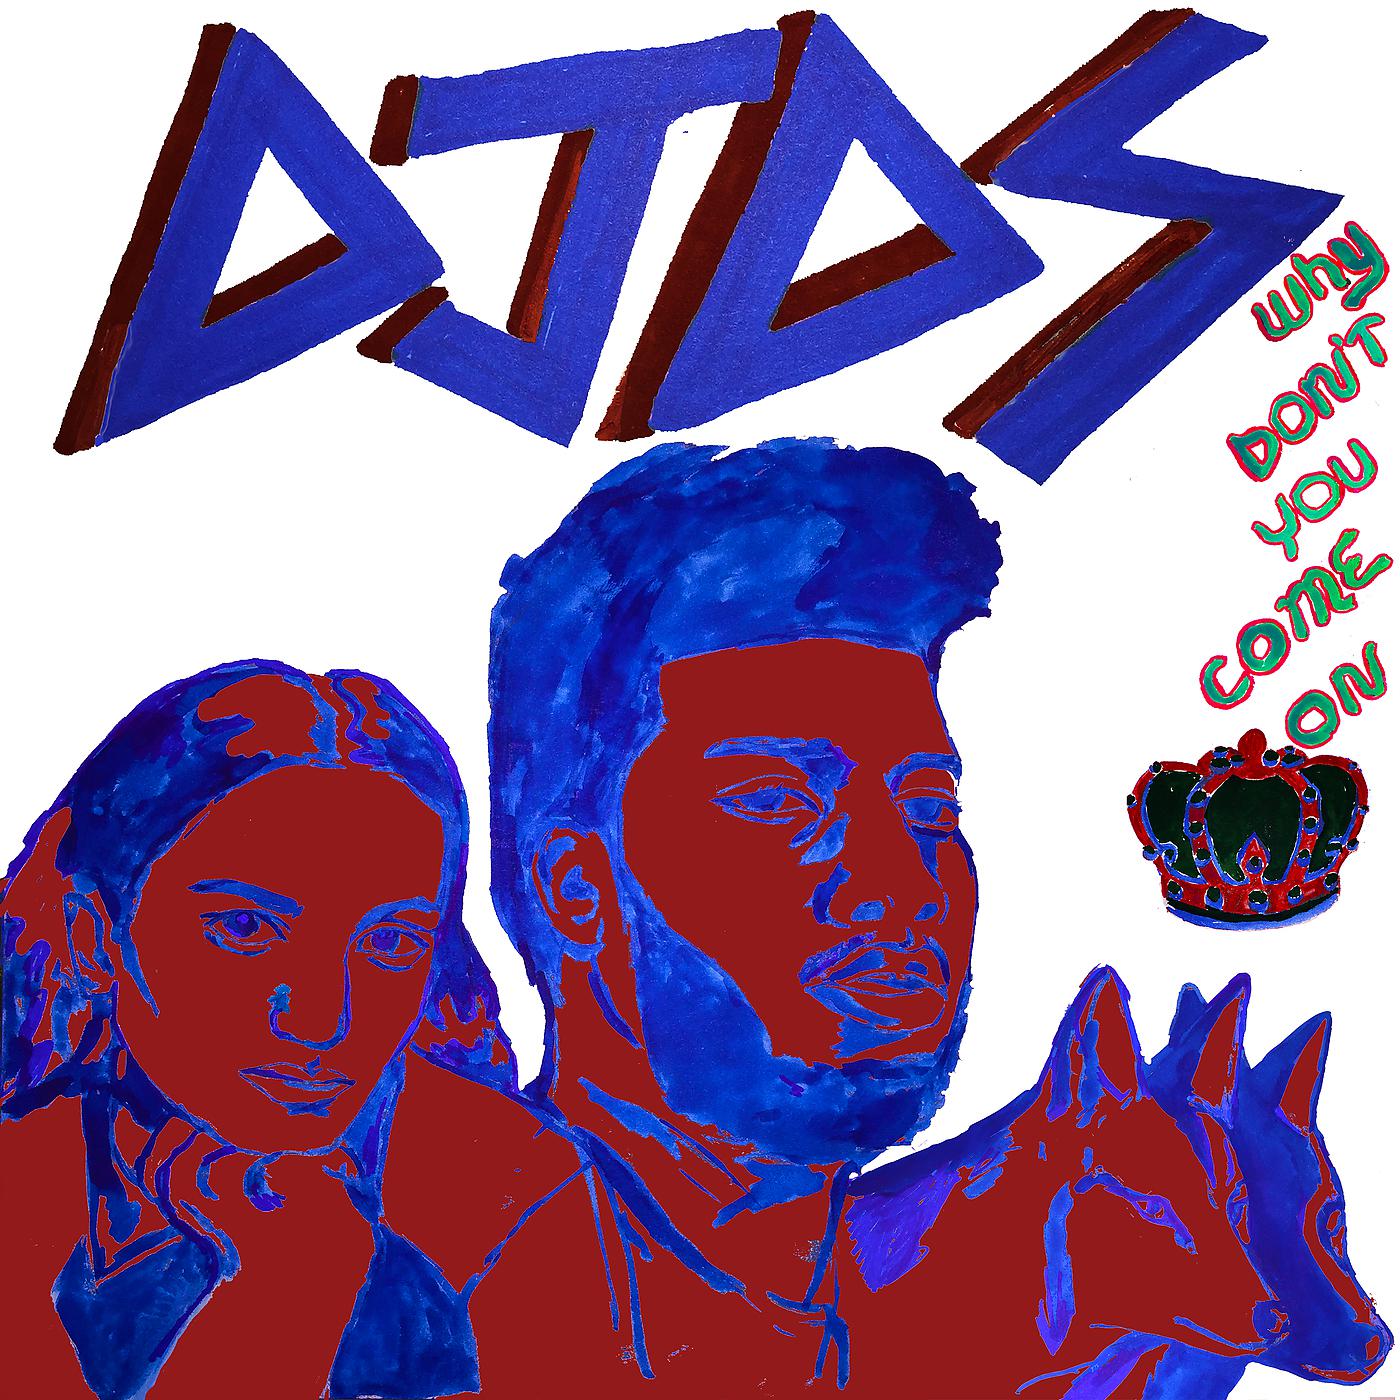 DJDS - Why Don't You Come On